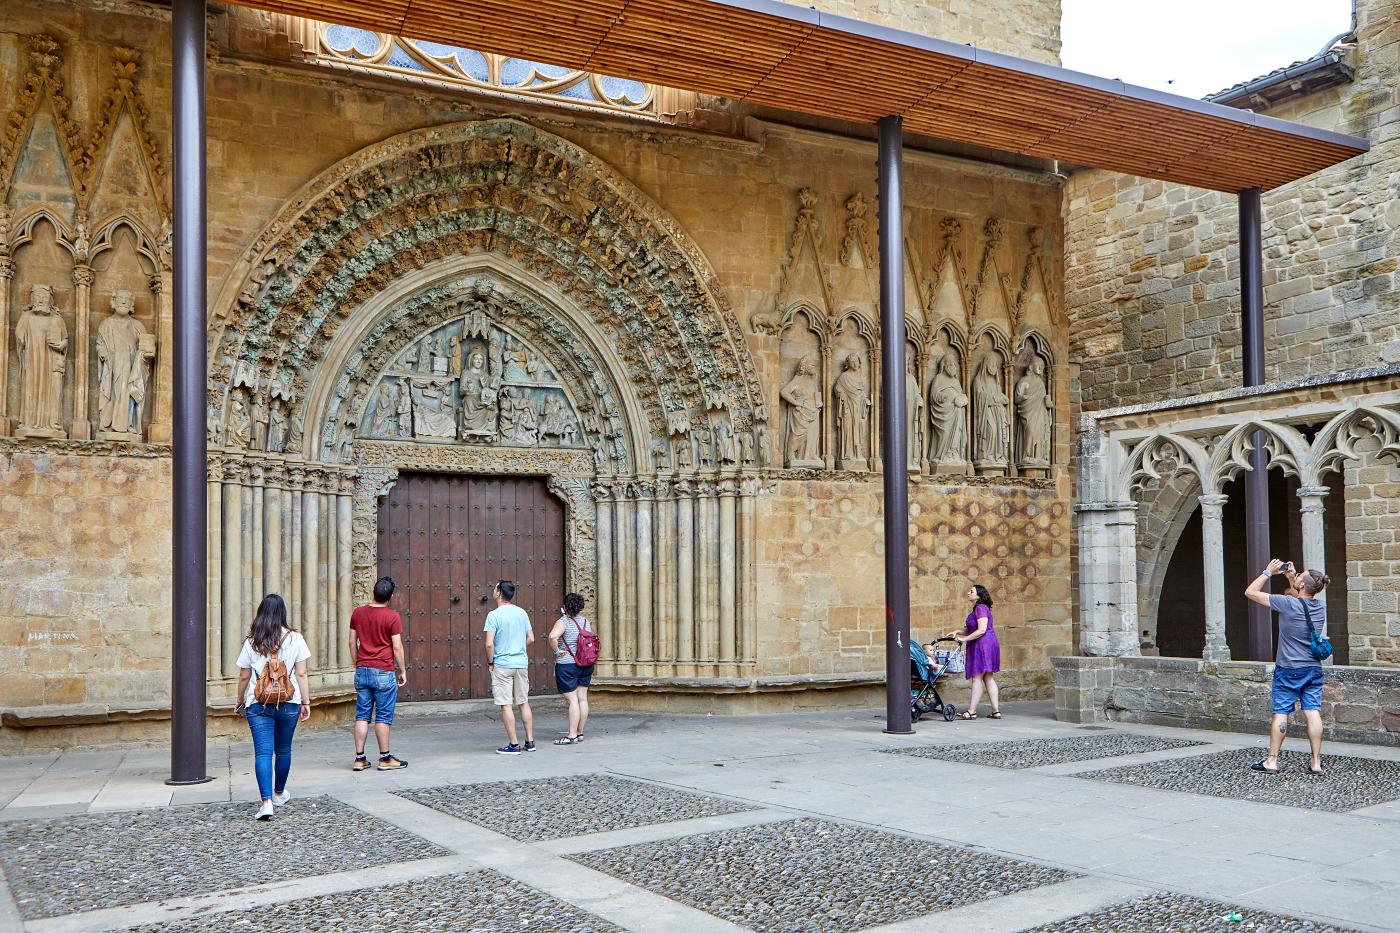 Several people observe the richly sculpted façade of the church of San Pedro de Olite